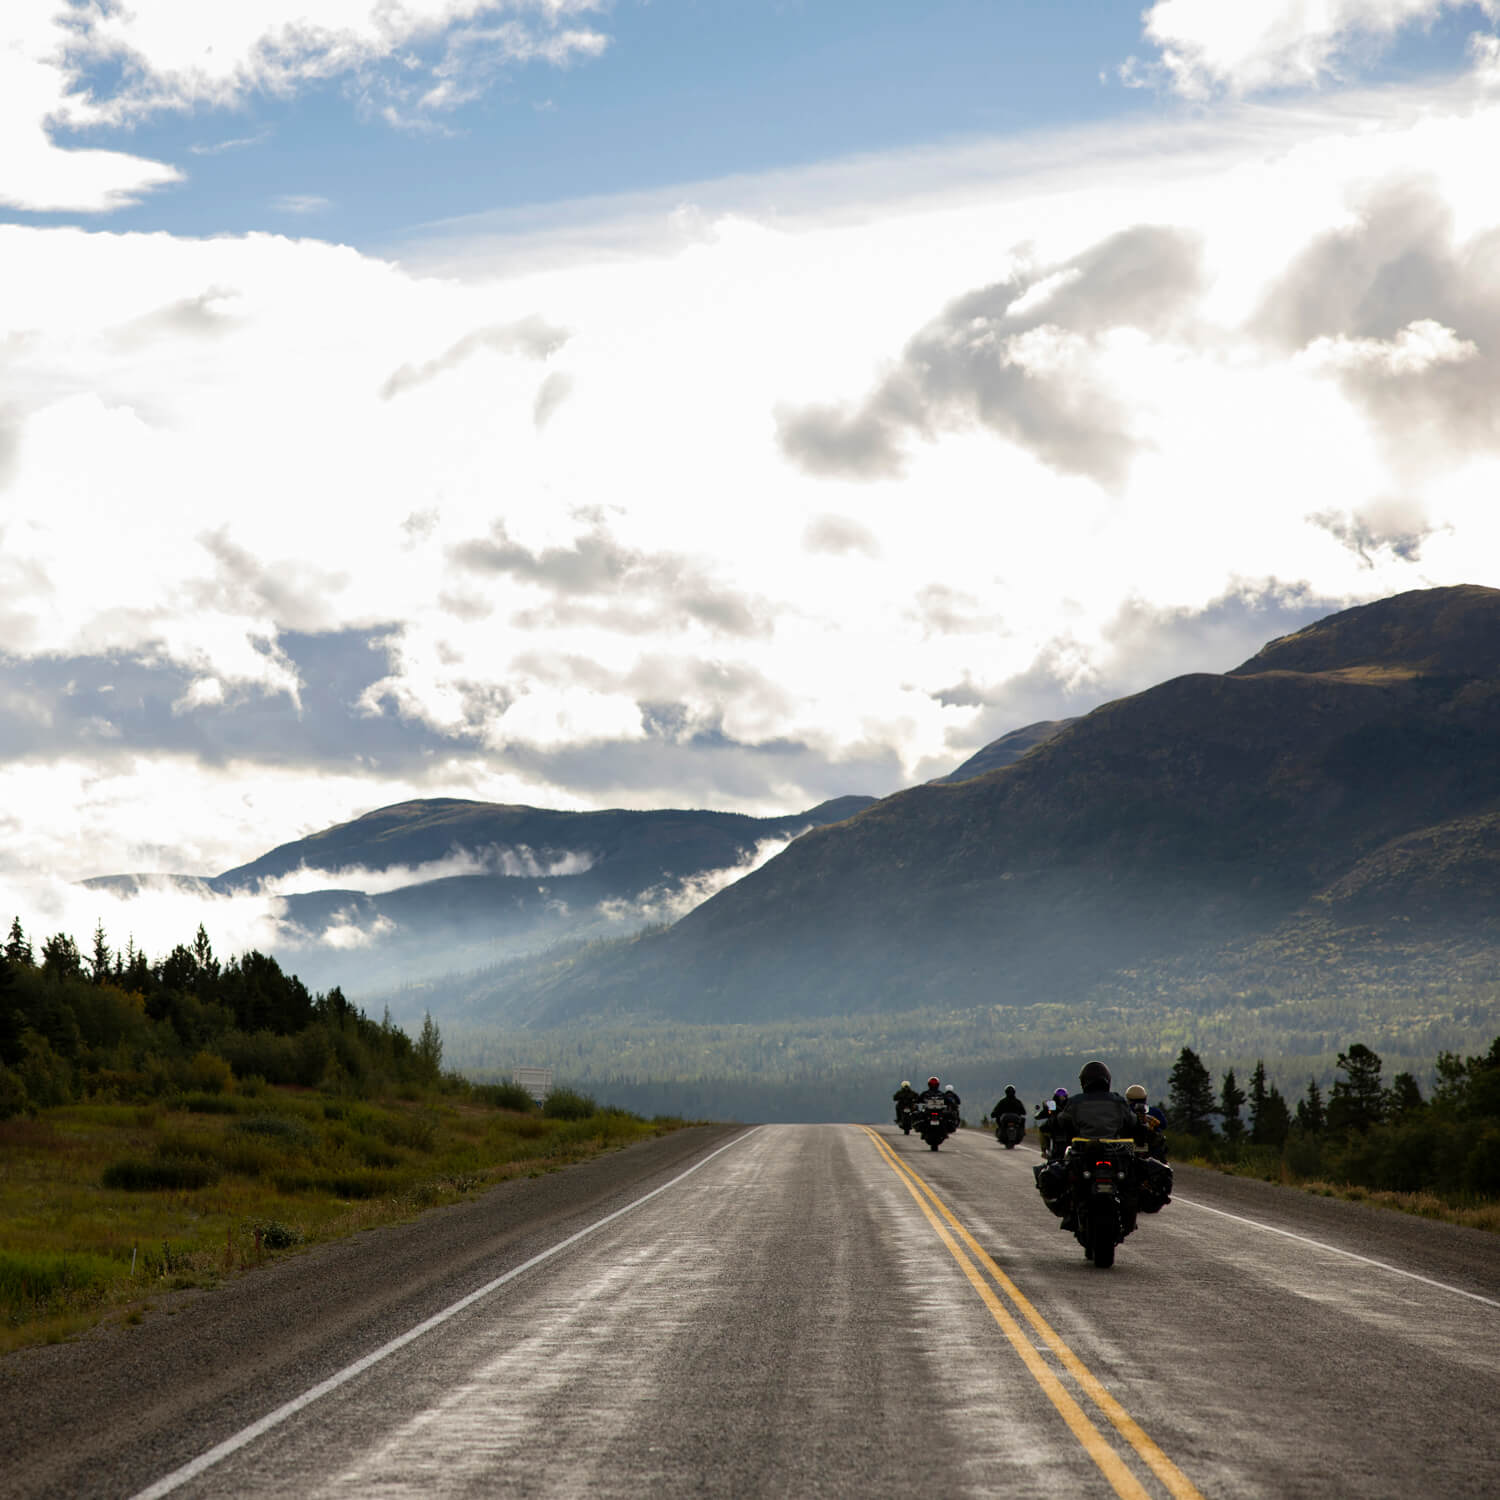 Image of a group of bikers riding down an alaskan road